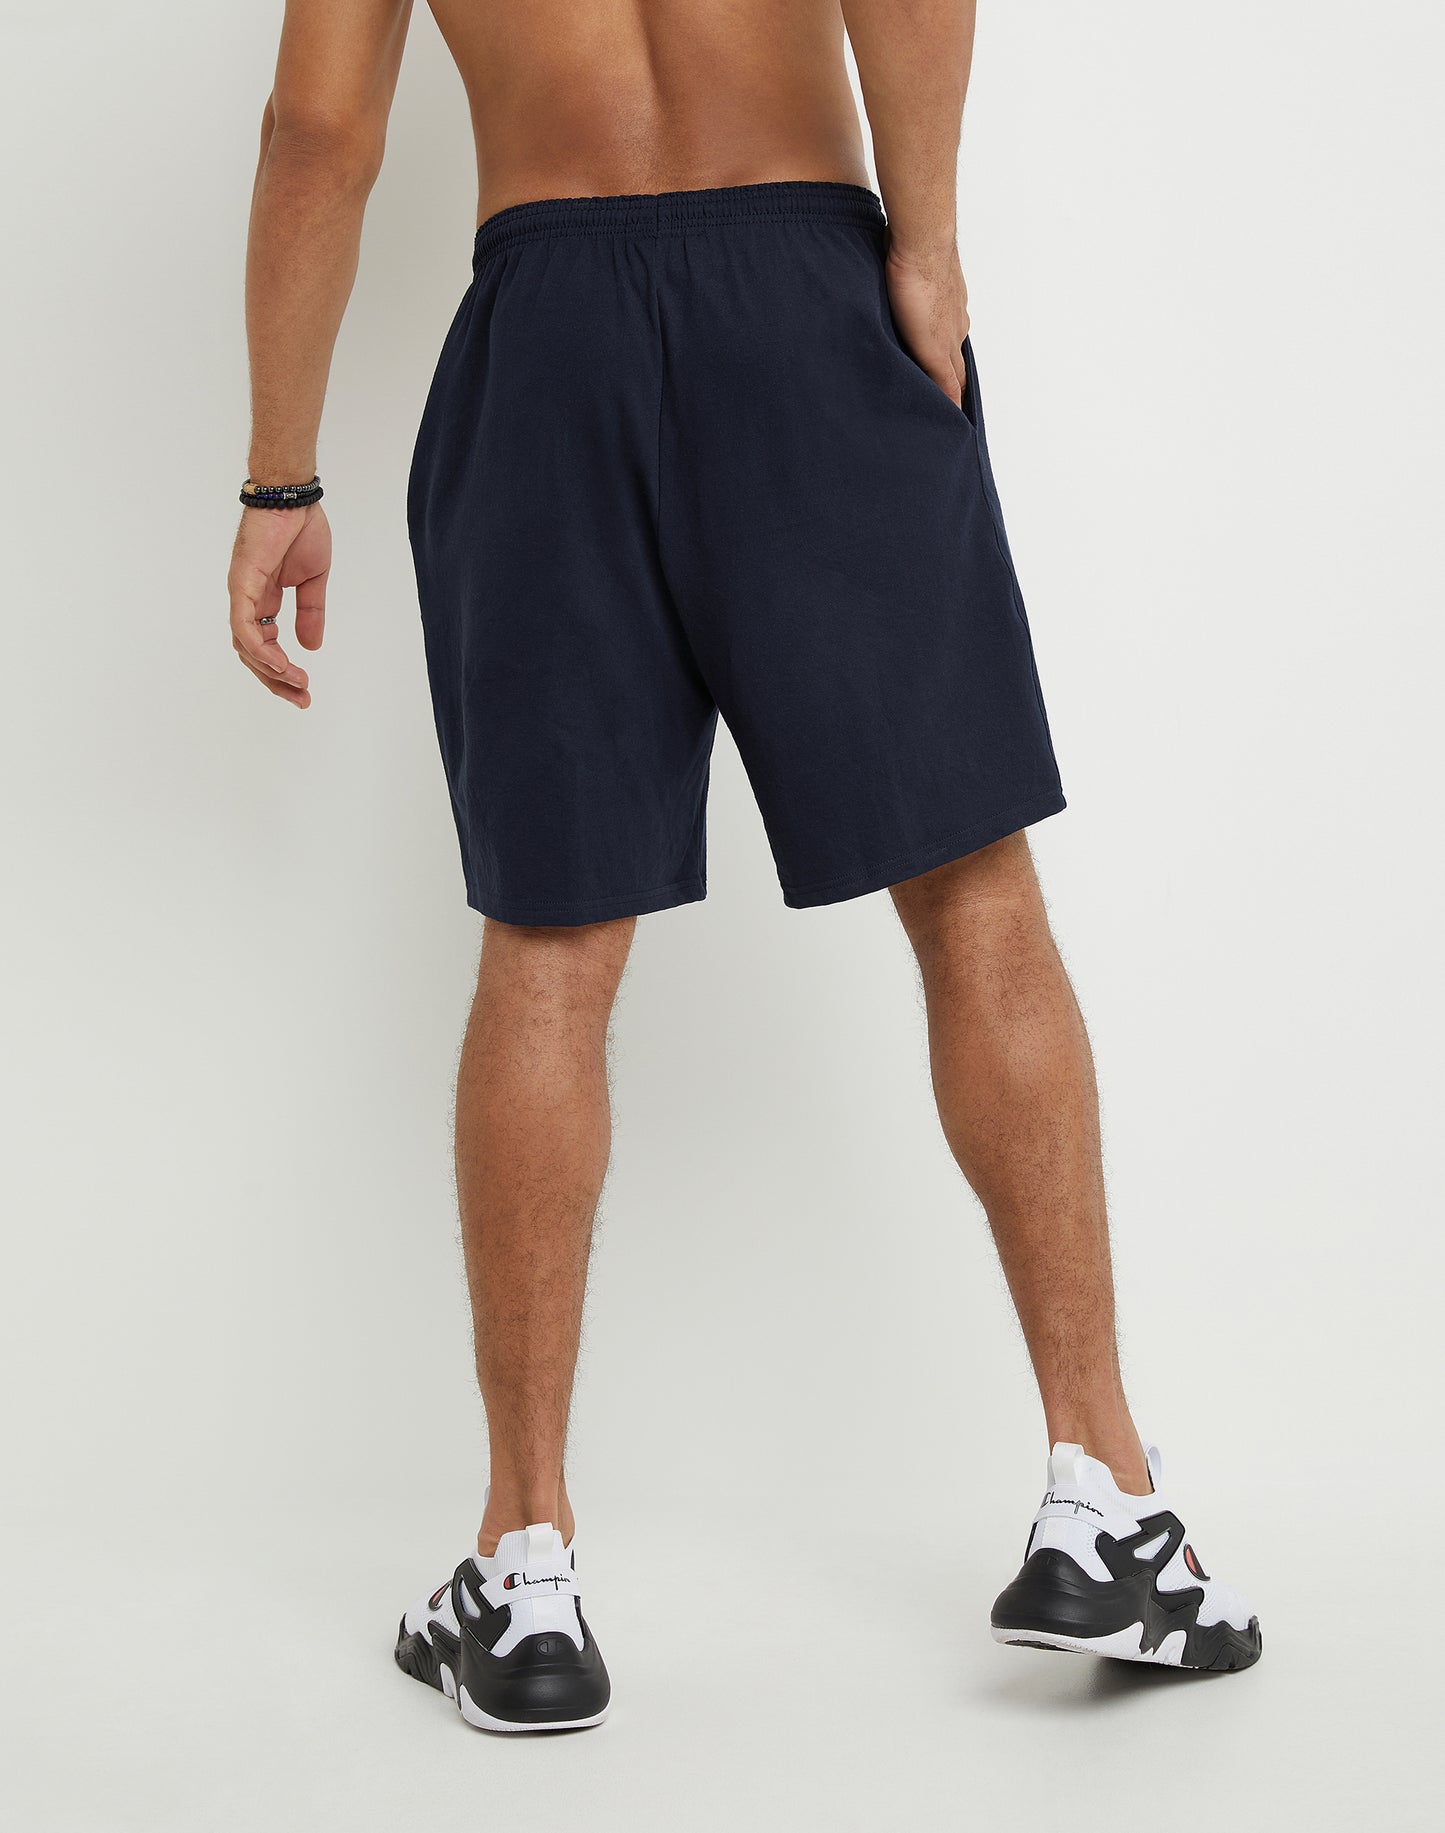 9-Inch Everyday Cotton Graphic Short